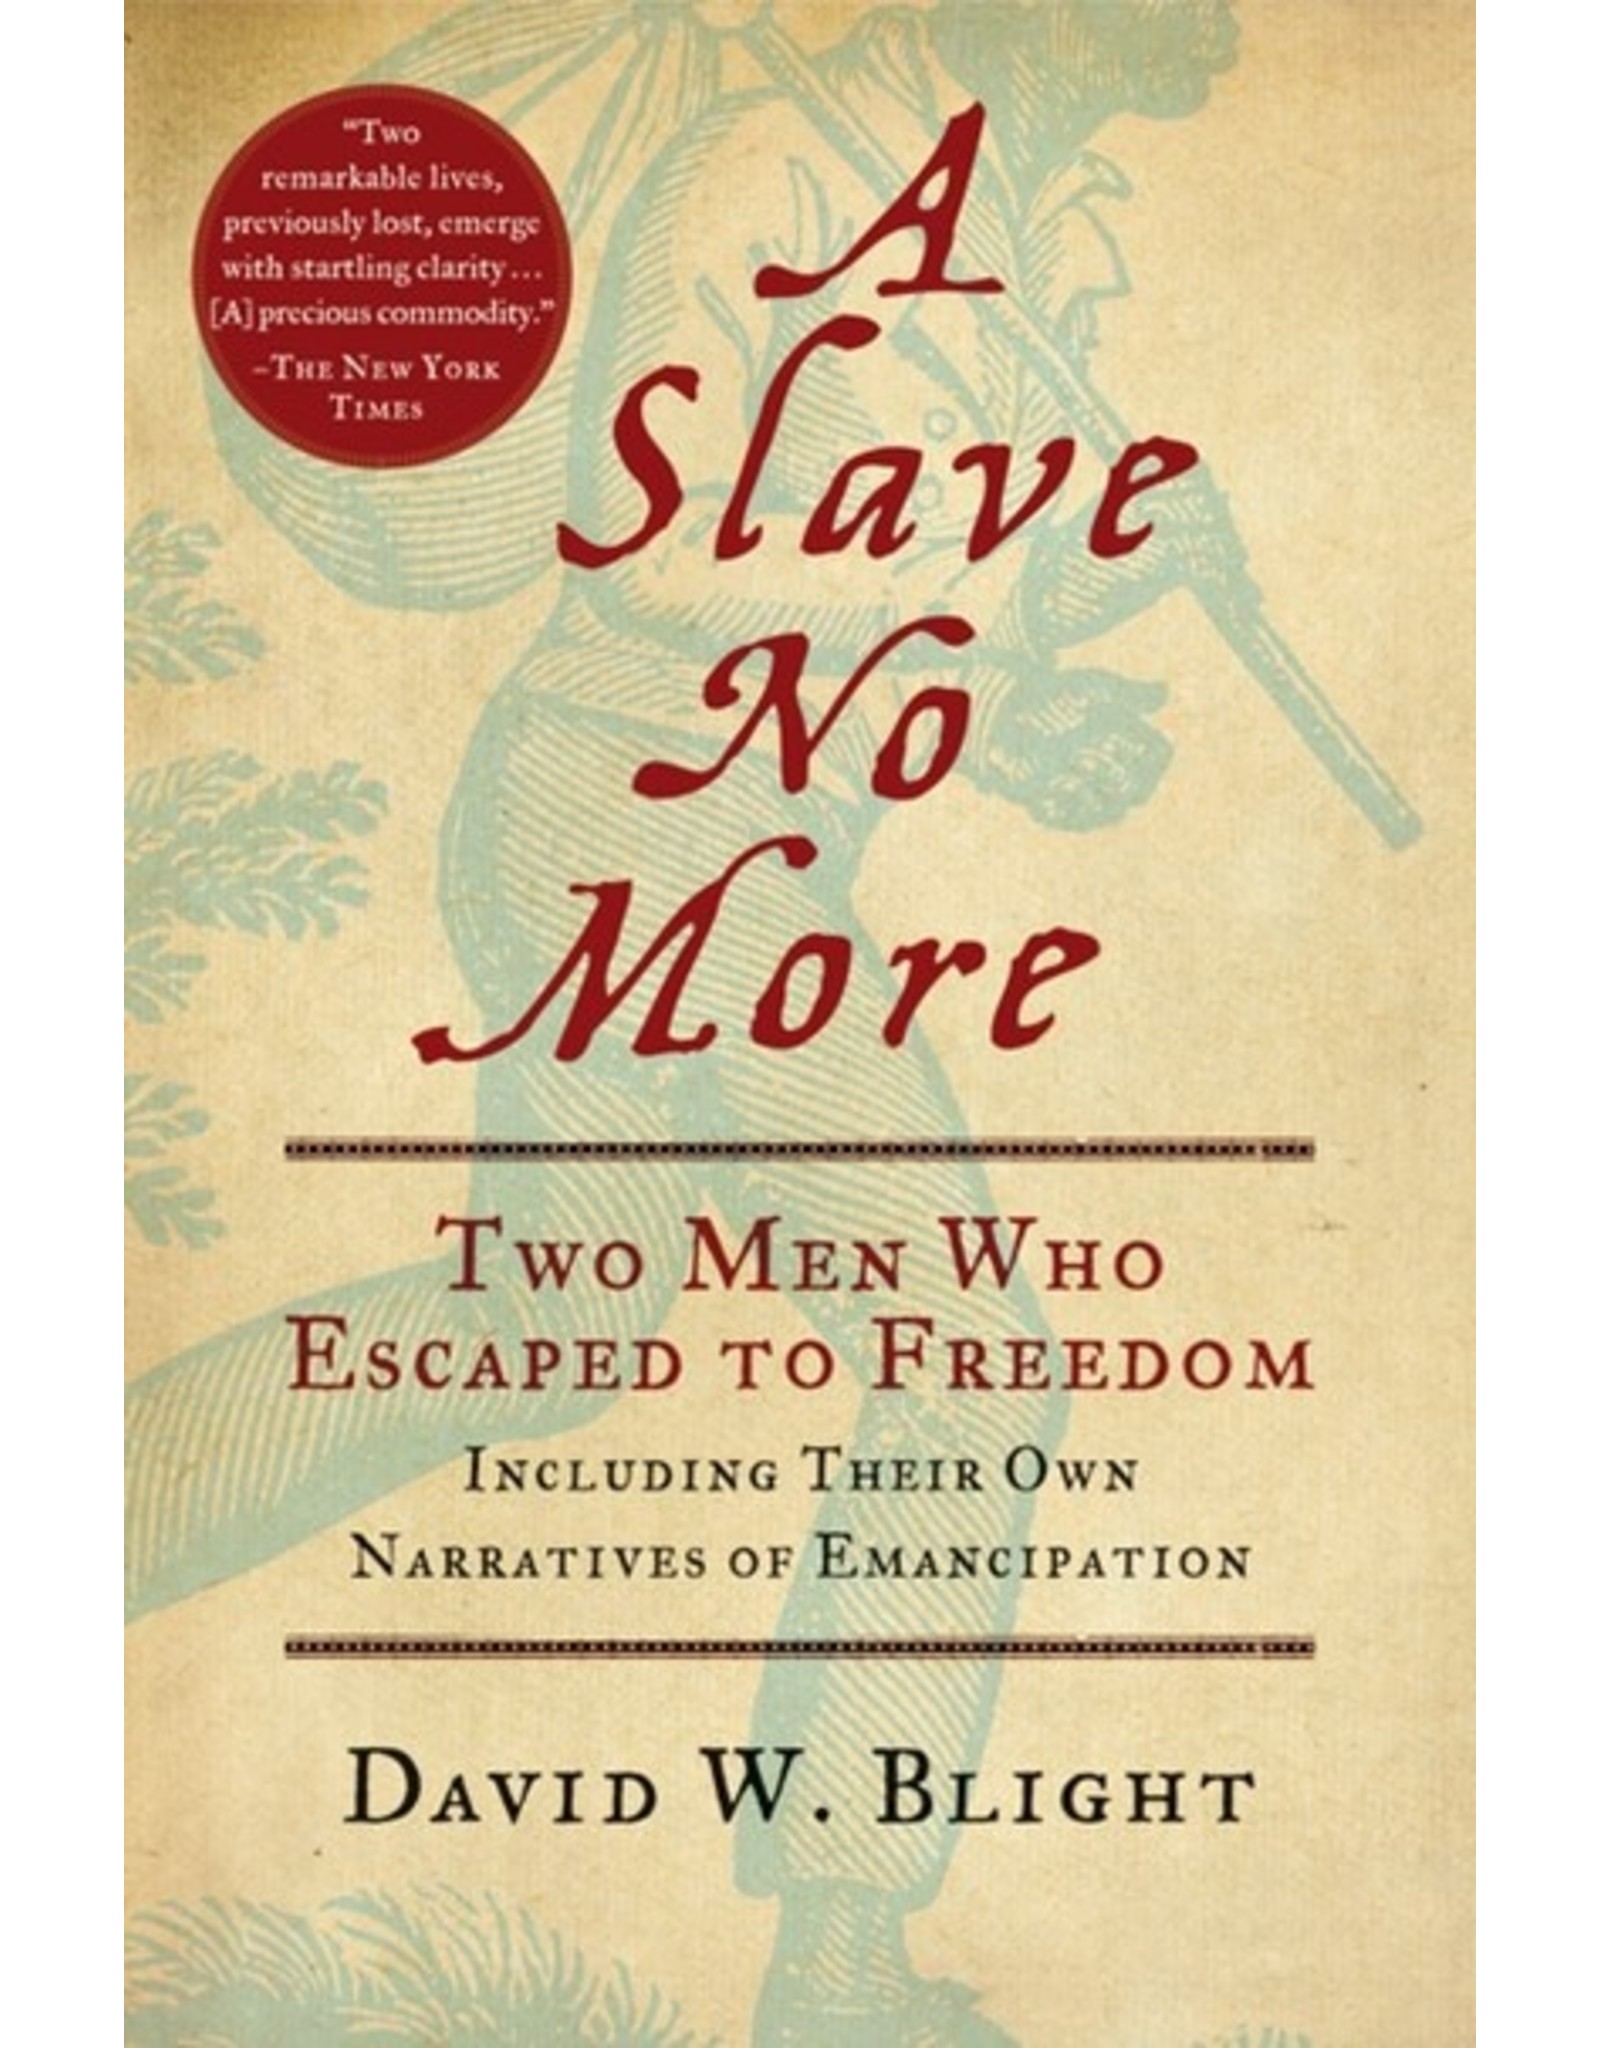 Books A Slave No More : Two Men Who Escaped to Freedom by David W. Blight (Banned Book Week 22)